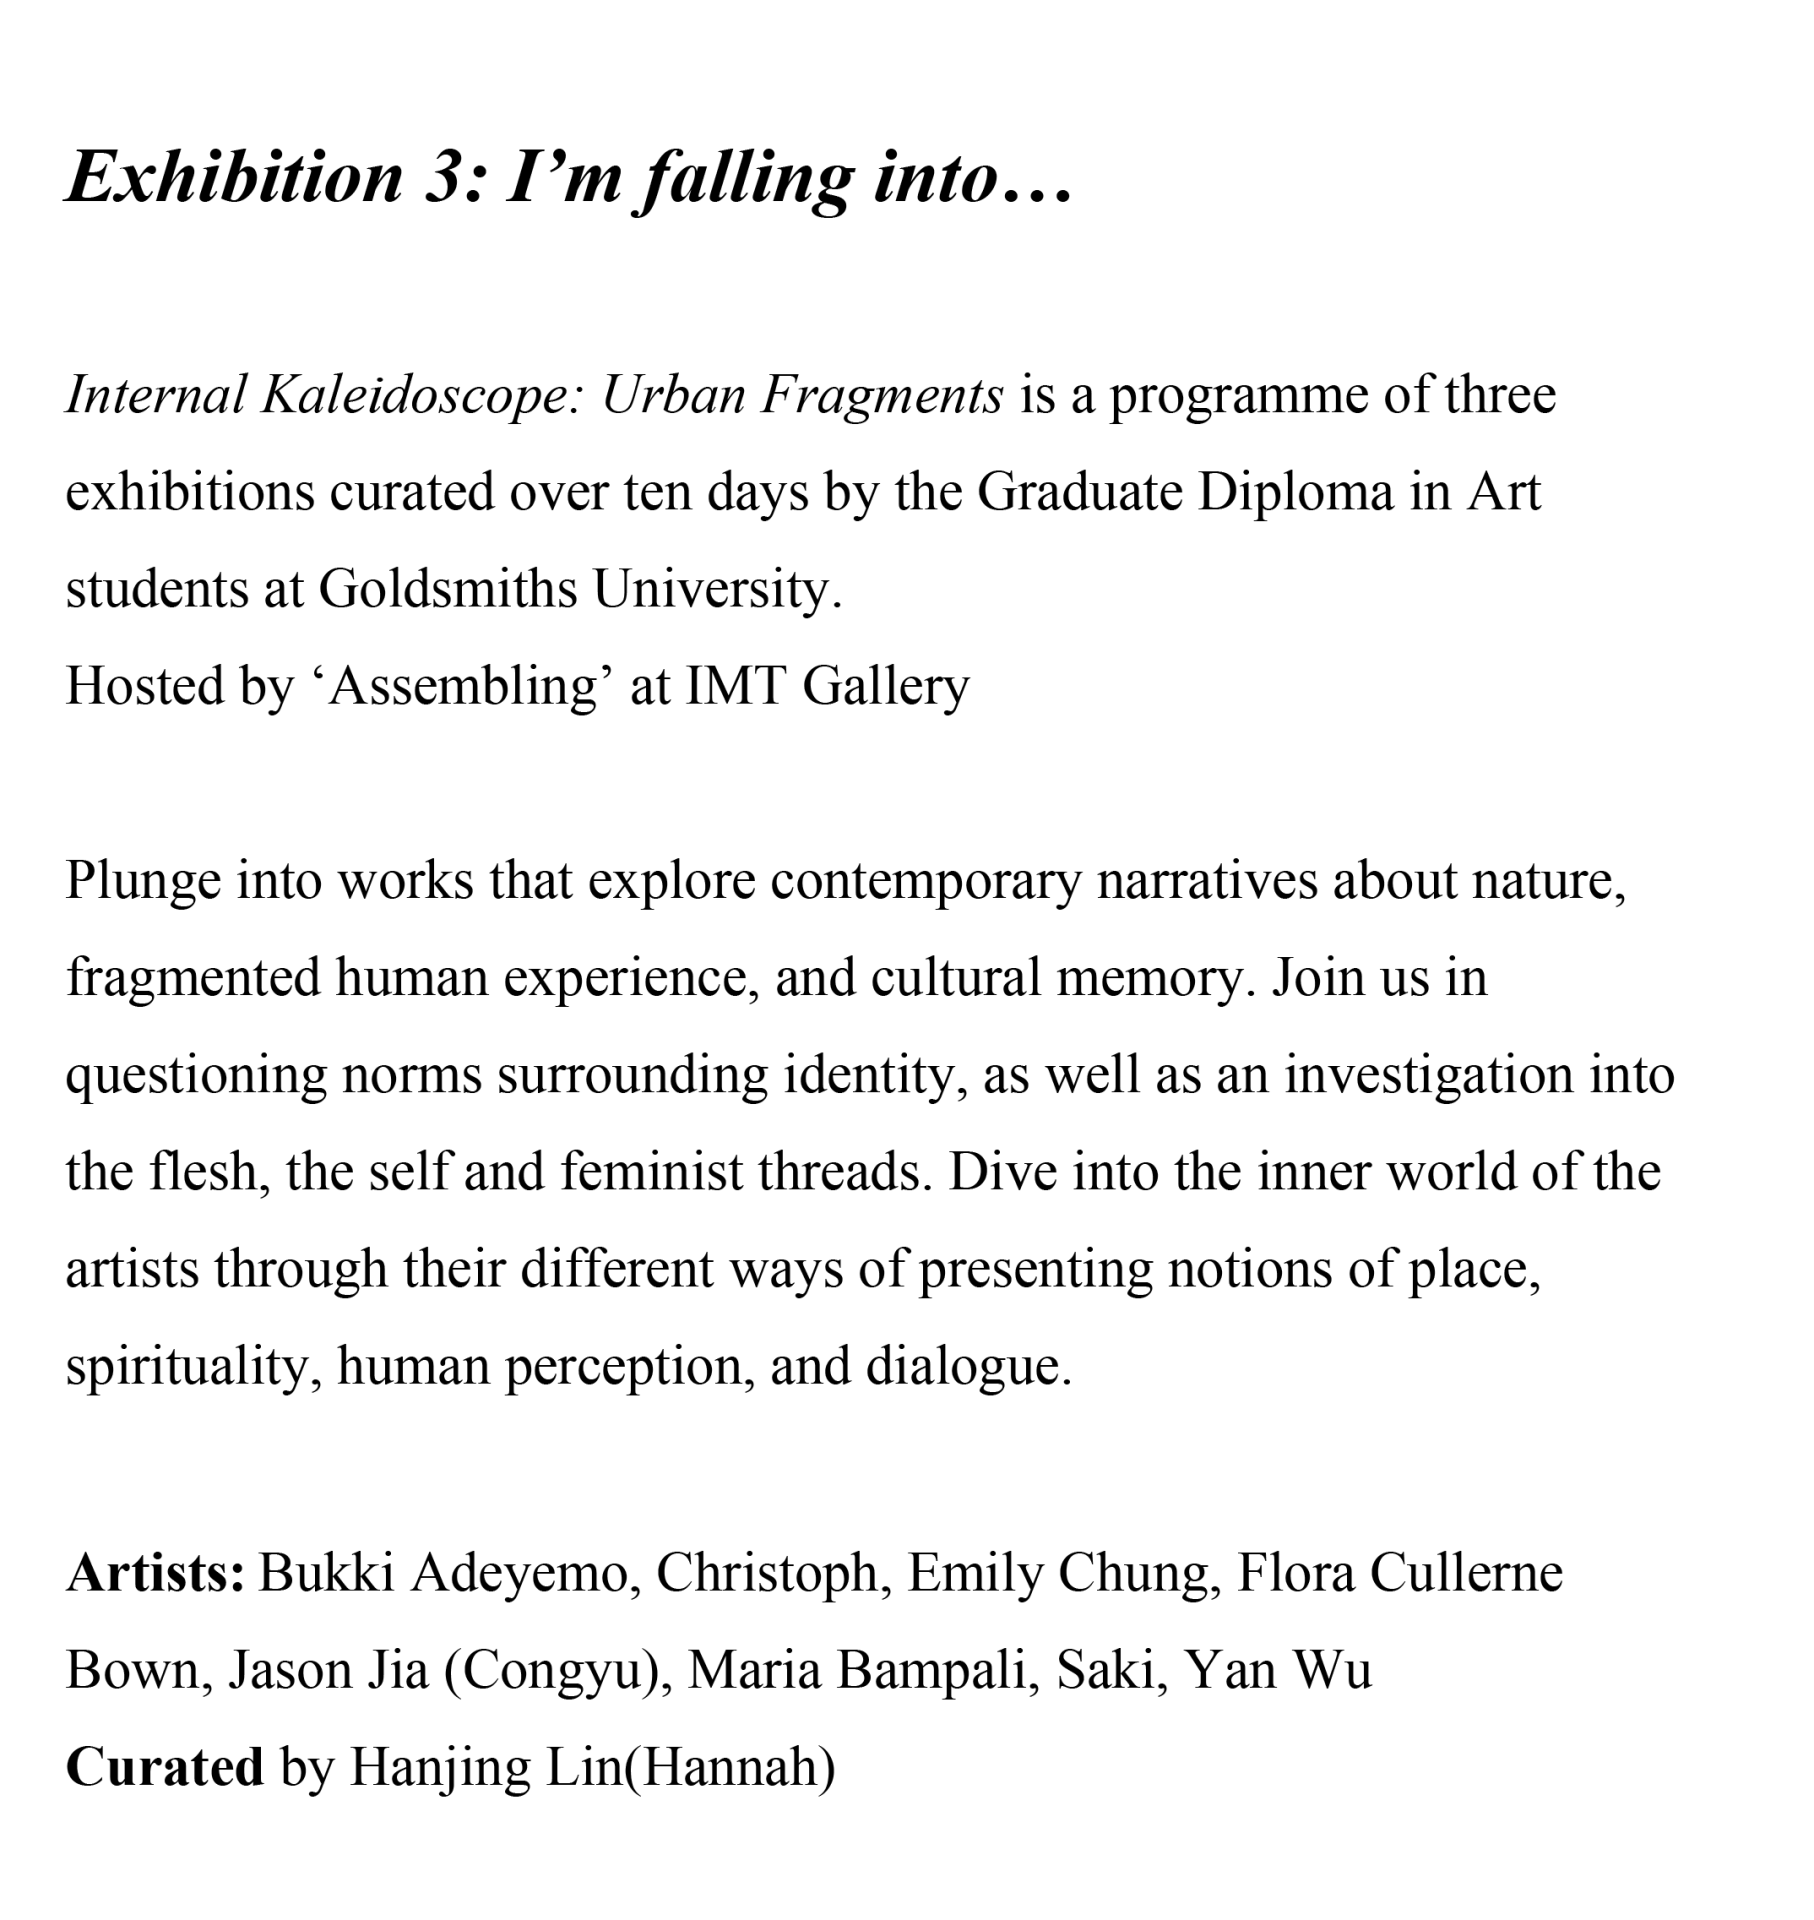 An image of the press release from I’m falling into..., 2022